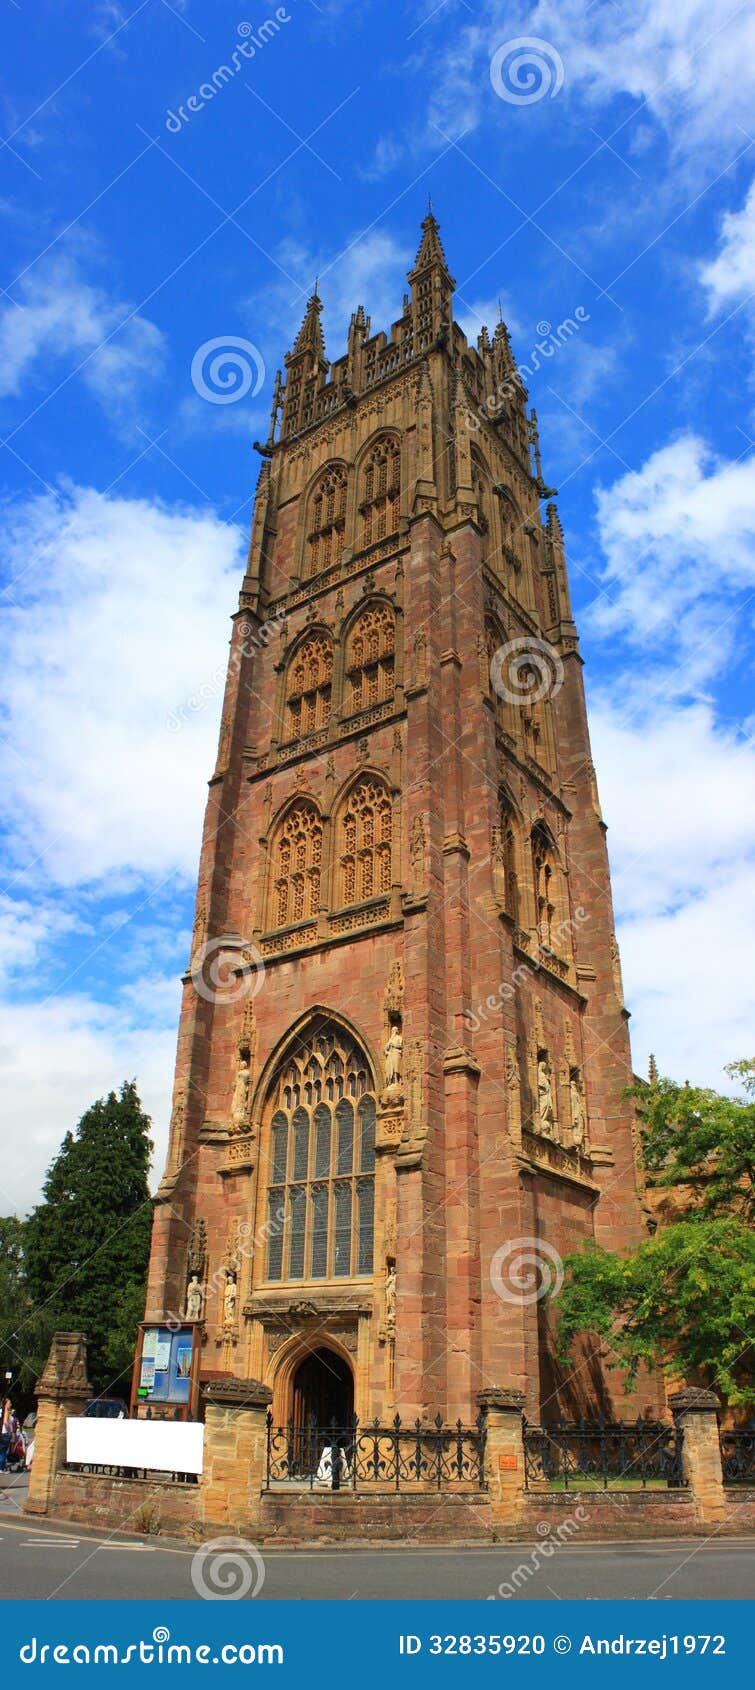 Cathedral in Taunton. Medieval cathedra in Taunton, Somerset in UK